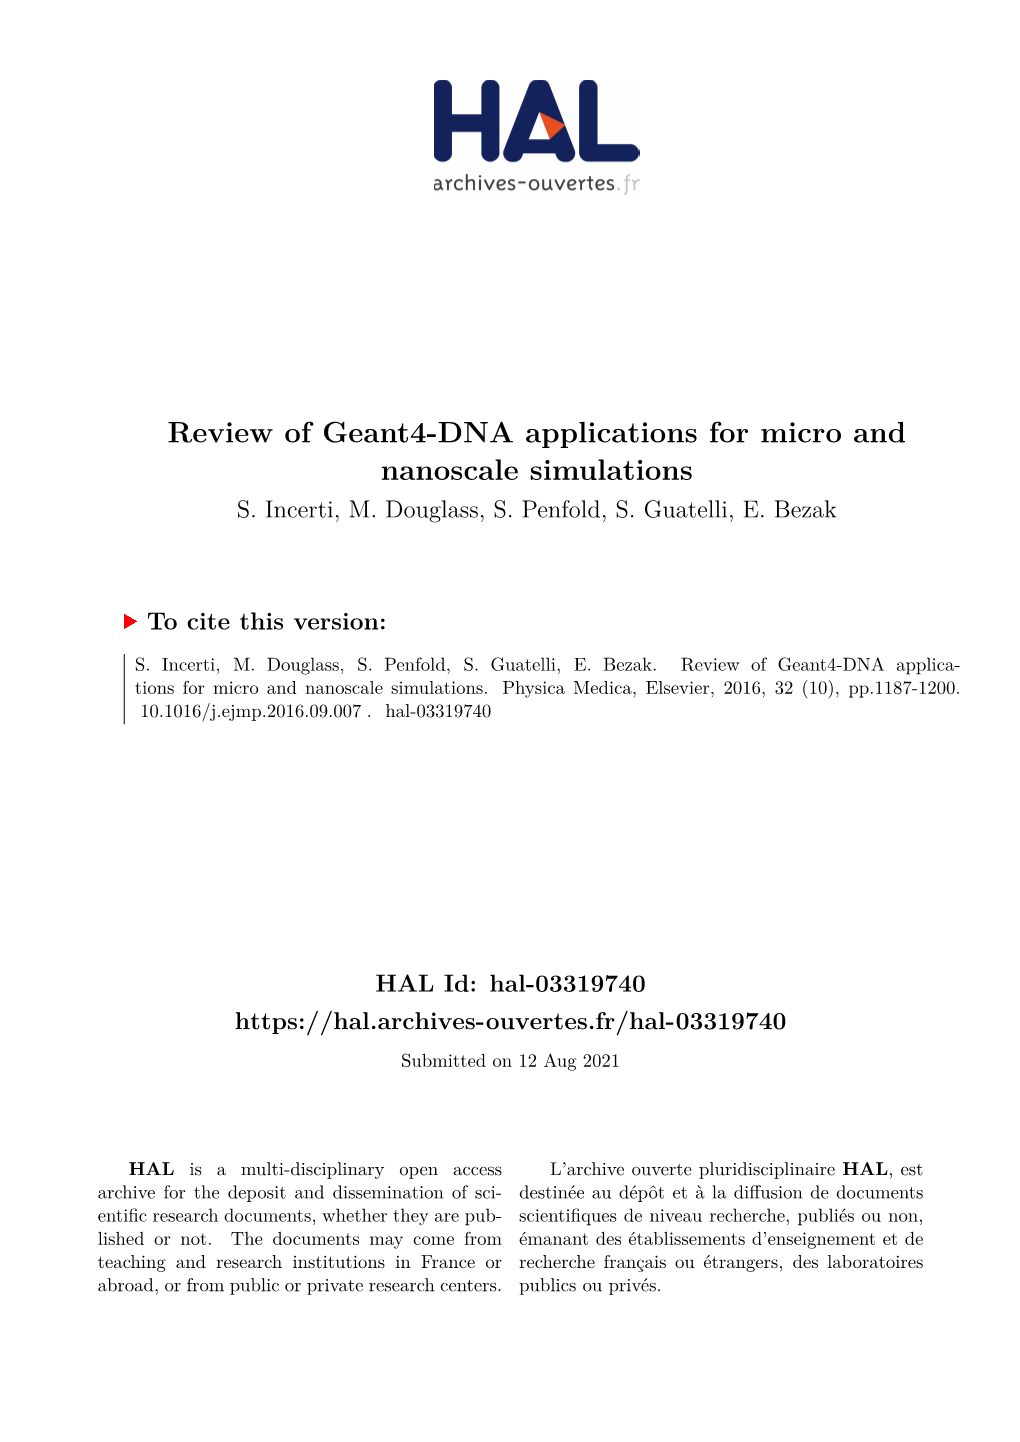 Review of Geant4-DNA Applications for Micro and Nanoscale Simulations S